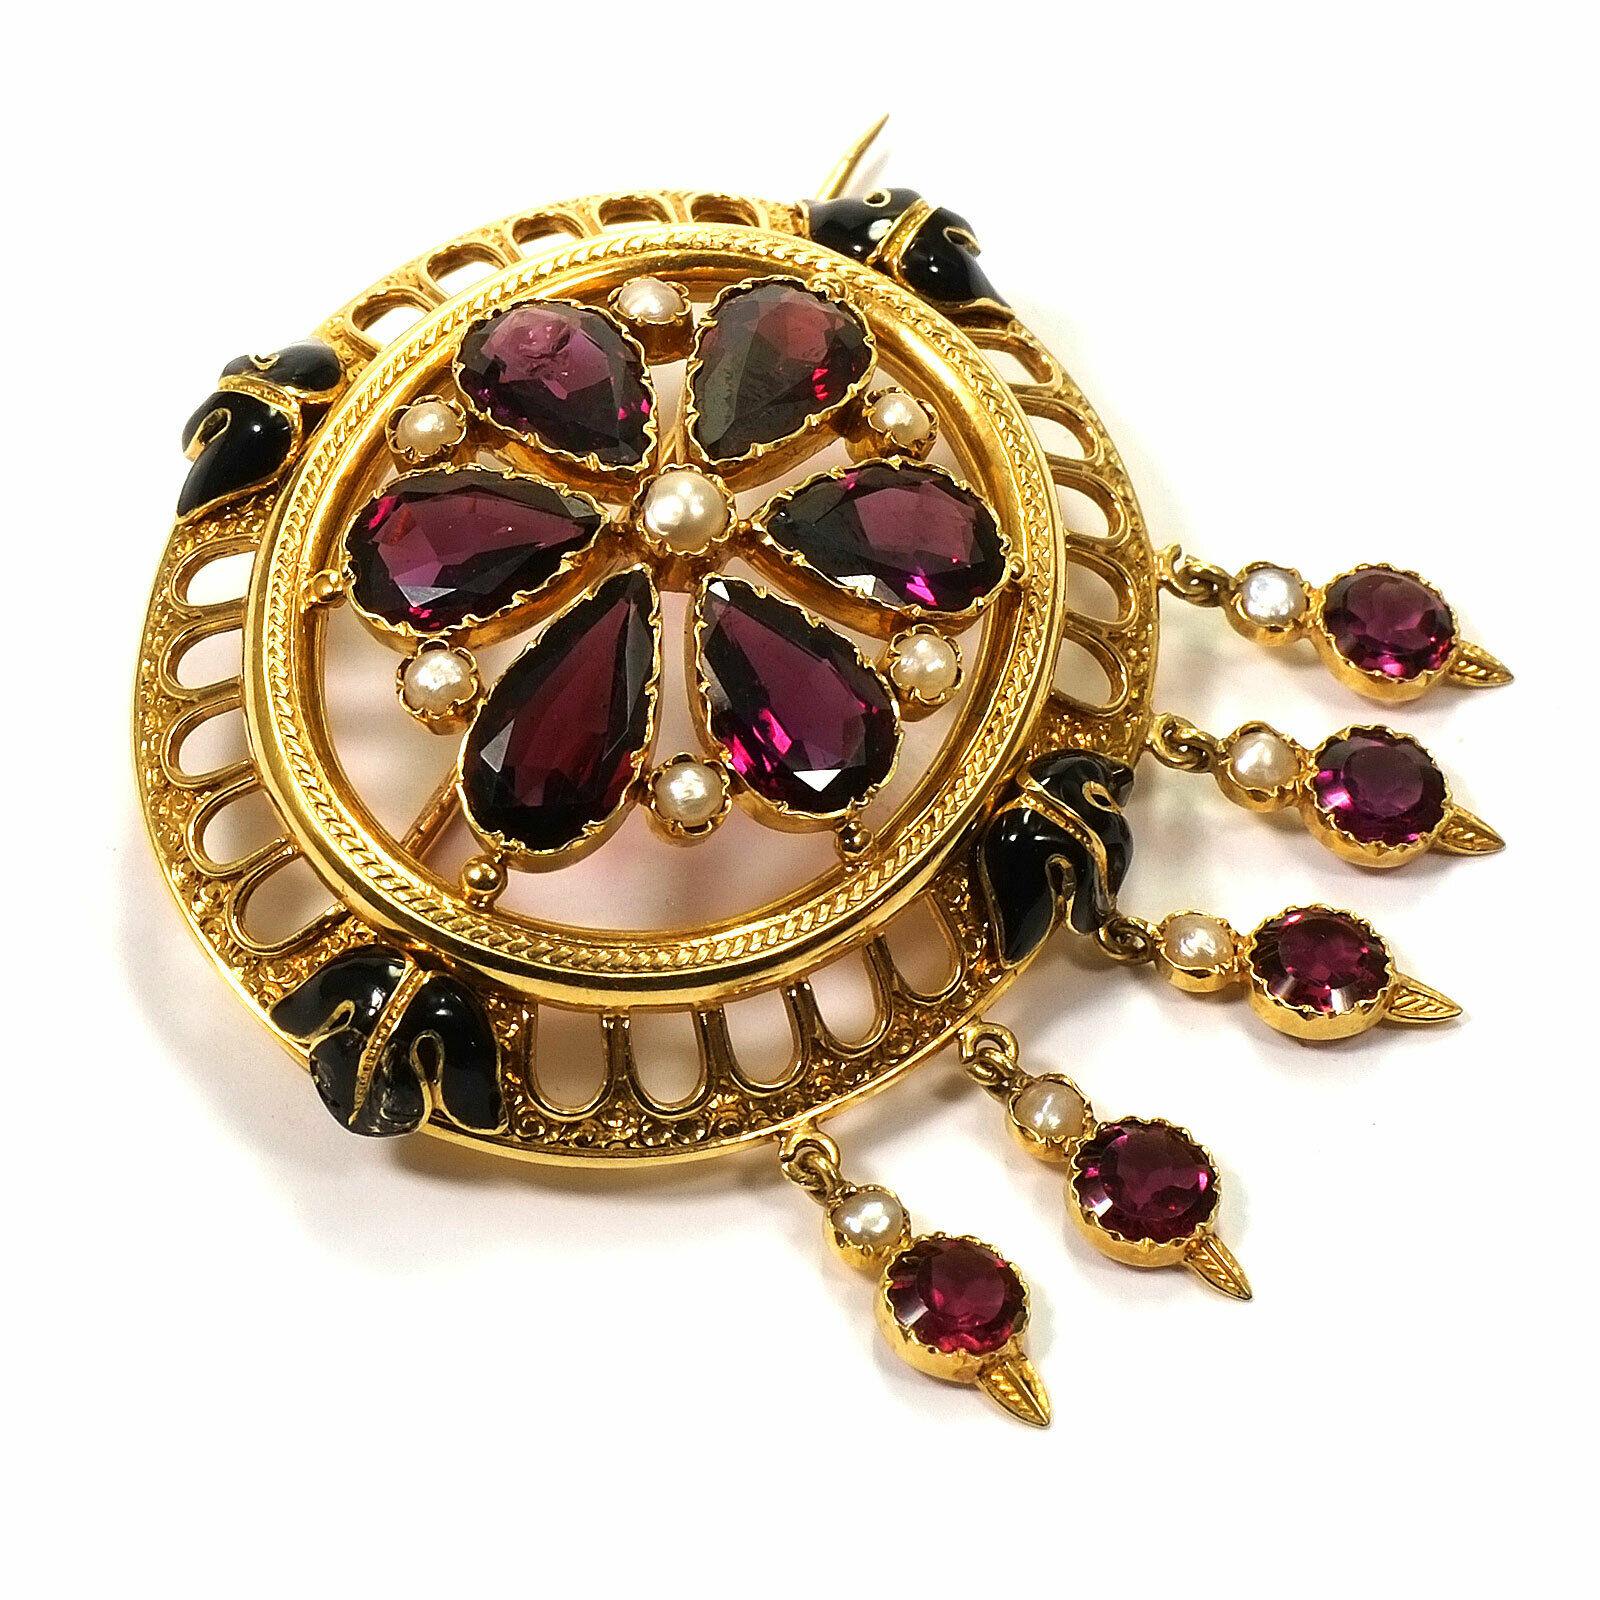 Antique Almandine Black Enamel 18K Gold Brooch, Paris circa 1860

Magnificent brooch made of high-quality, finely chased gold, oval with a lattice-like openwork edge and black enameled leaves, the center cape-shaped set with teardrop-shaped